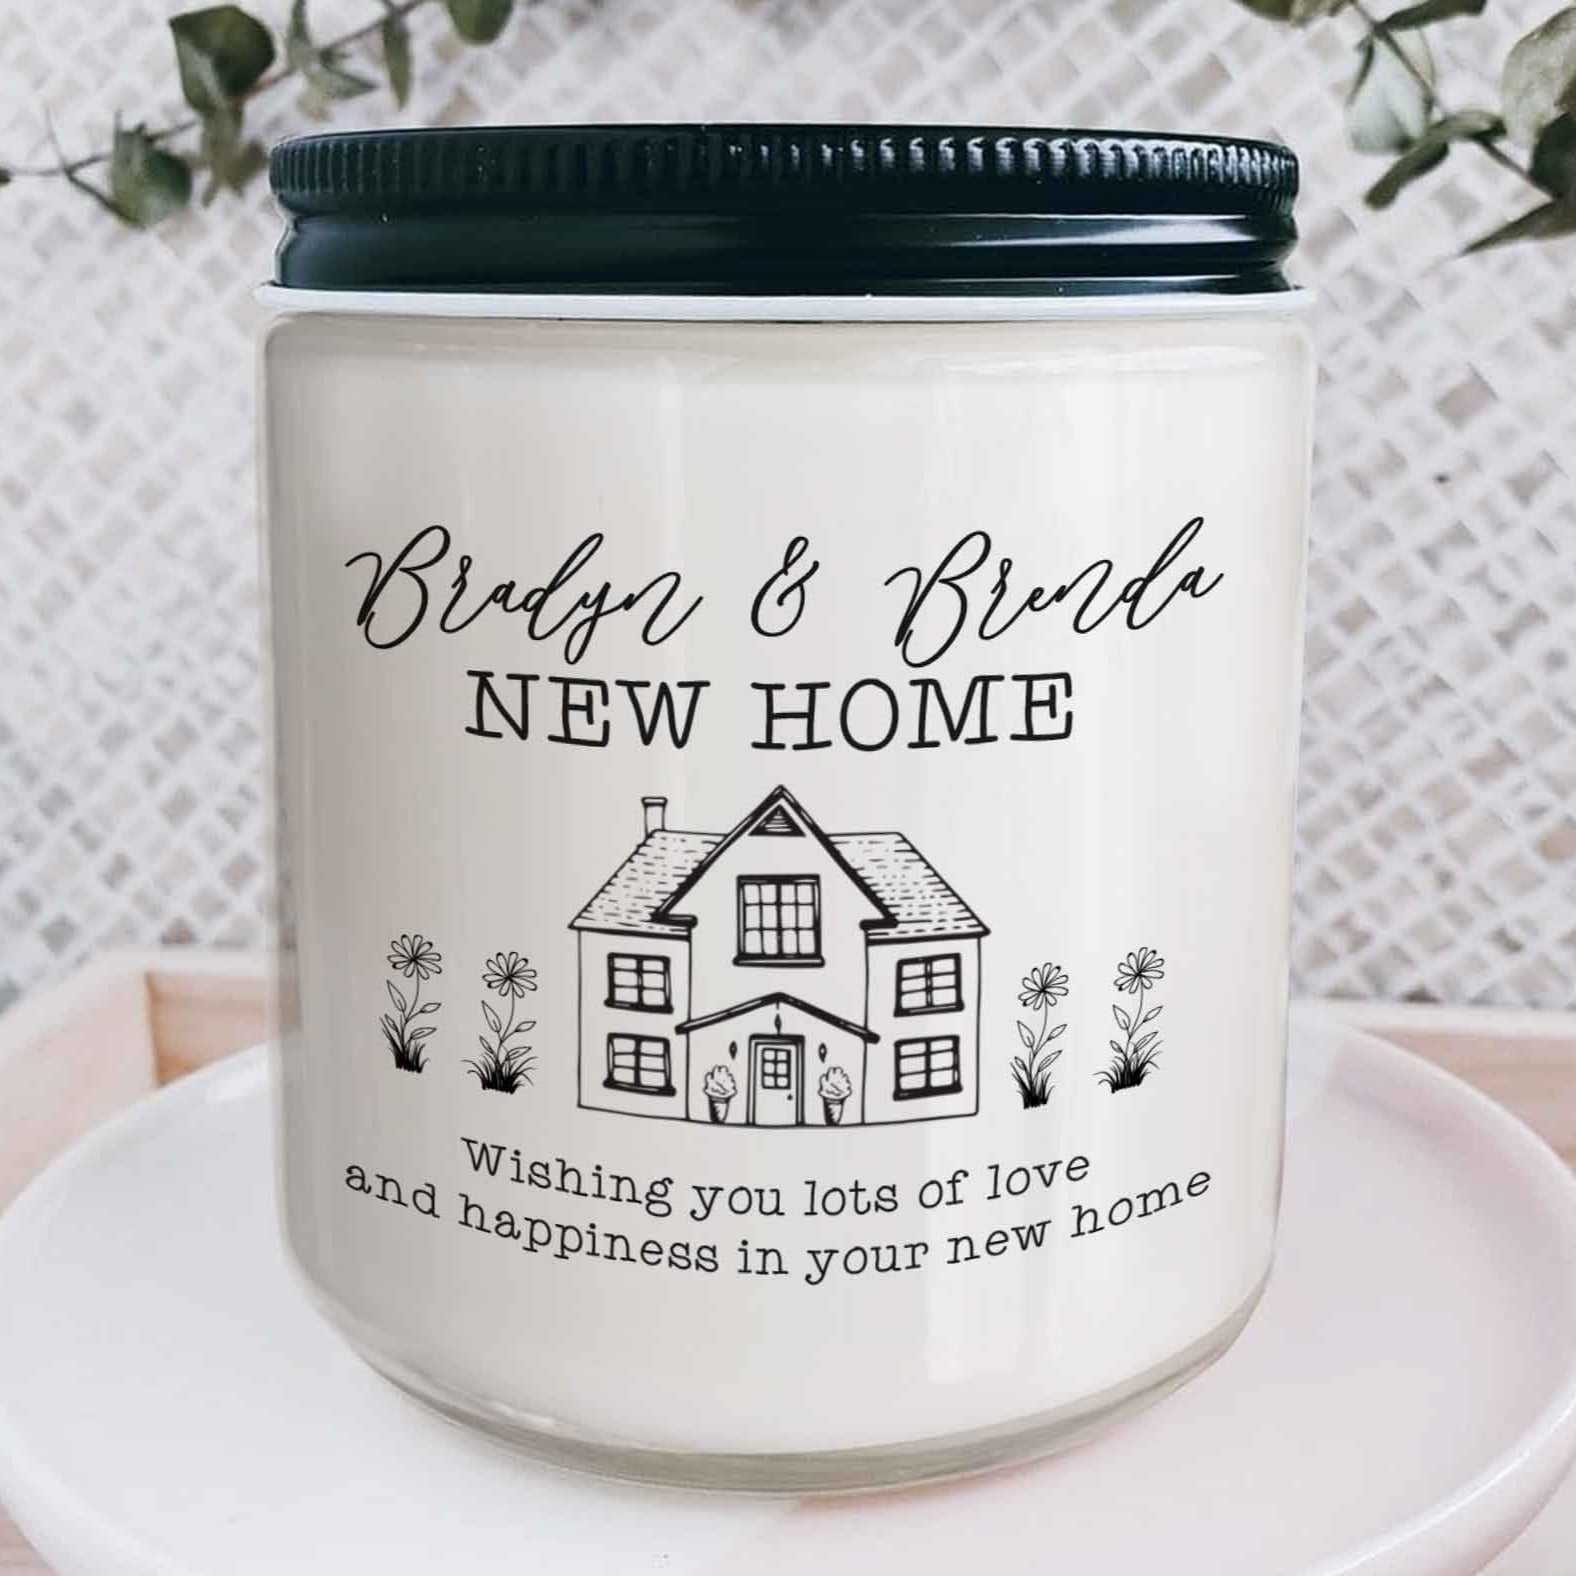 New Home Personalized Candle Gift, Housewarming Candle For Best Friend, Realtor Closing Gift Custom Soy Wax Candle